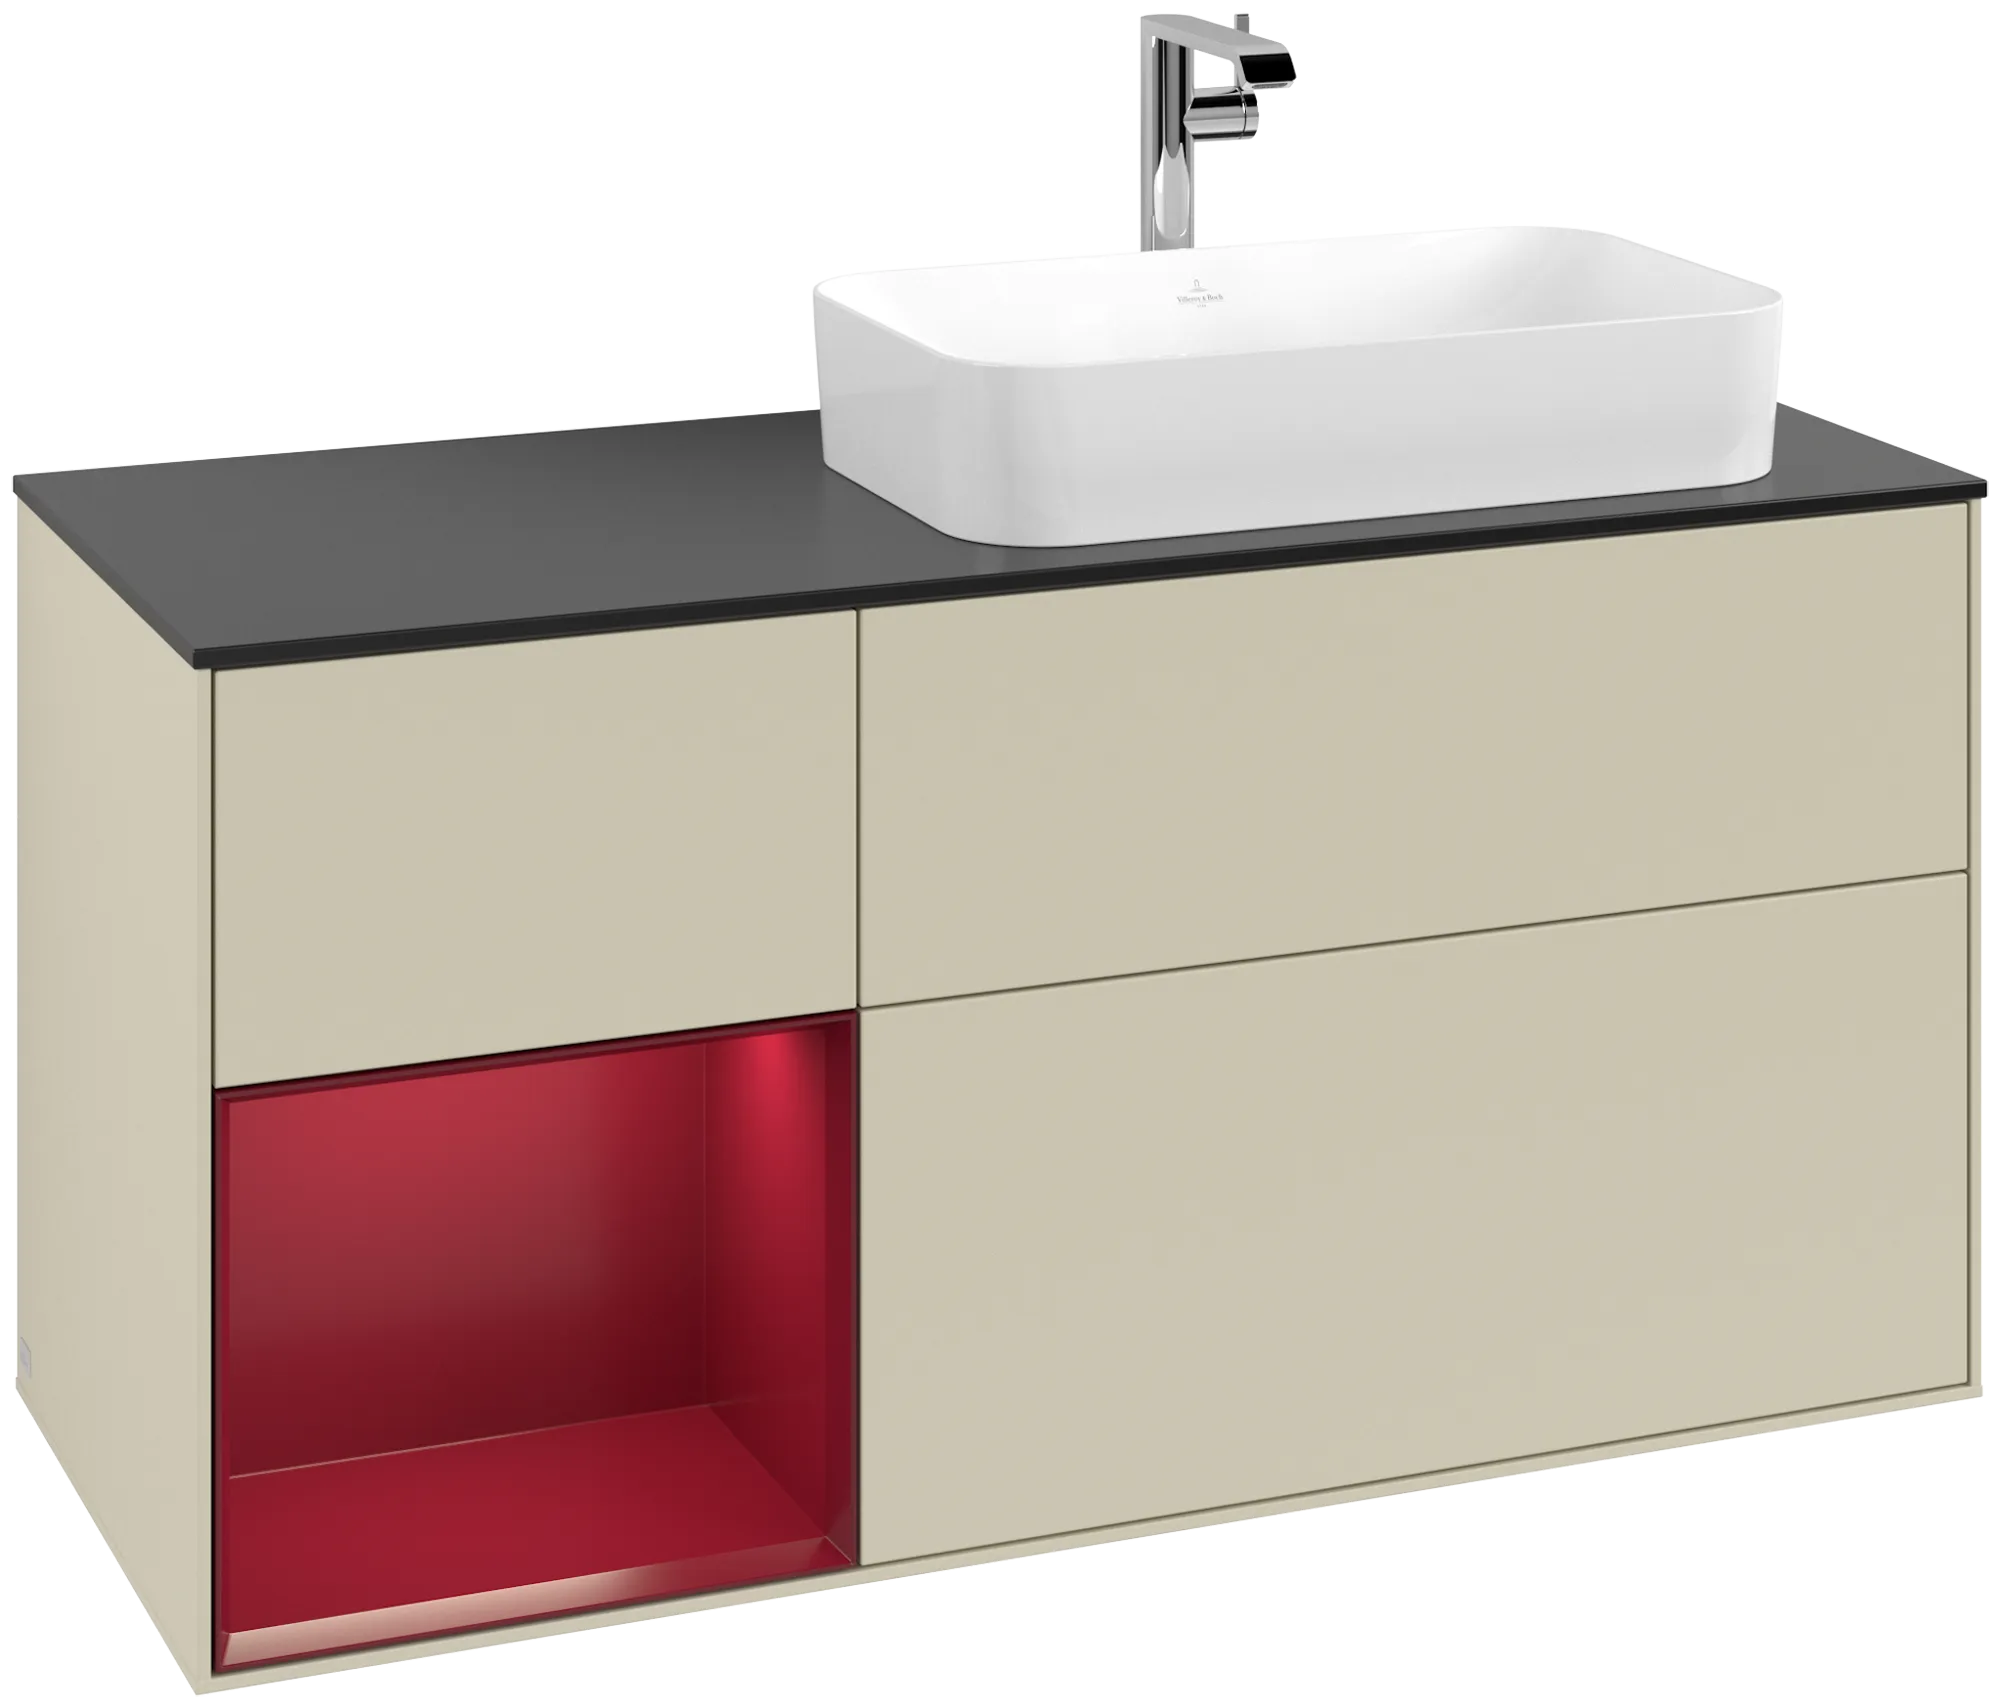 Picture of VILLEROY BOCH Finion Vanity unit, with lighting, 3 pull-out compartments, 1200 x 603 x 501 mm, Silk Grey Matt Lacquer / Peony Matt Lacquer / Glass Black Matt #G272HBHJ